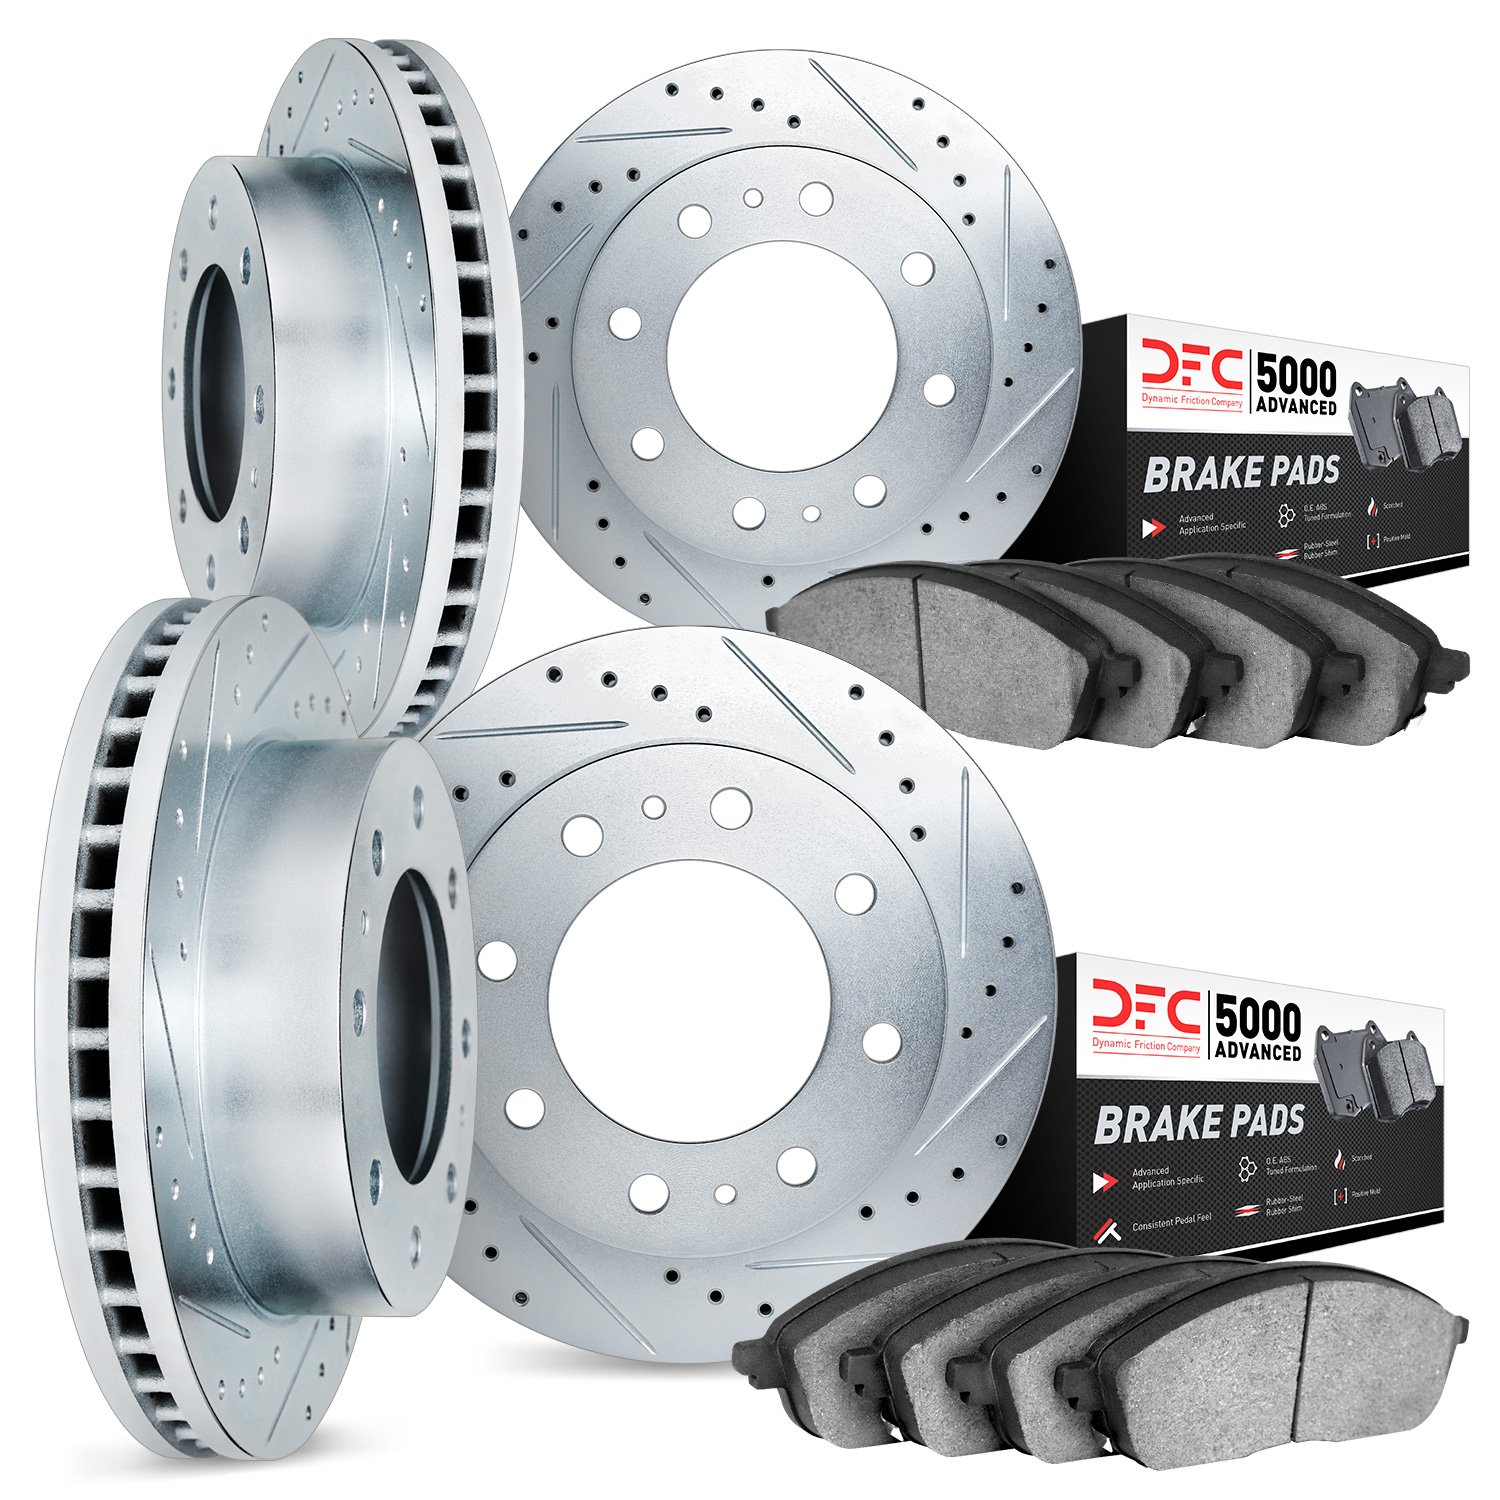 7504-54327 Drilled/Slotted Brake Rotors w/5000 Advanced Brake Pads Kit [Silver], 1999-1999 Ford/Lincoln/Mercury/Mazda, Position: